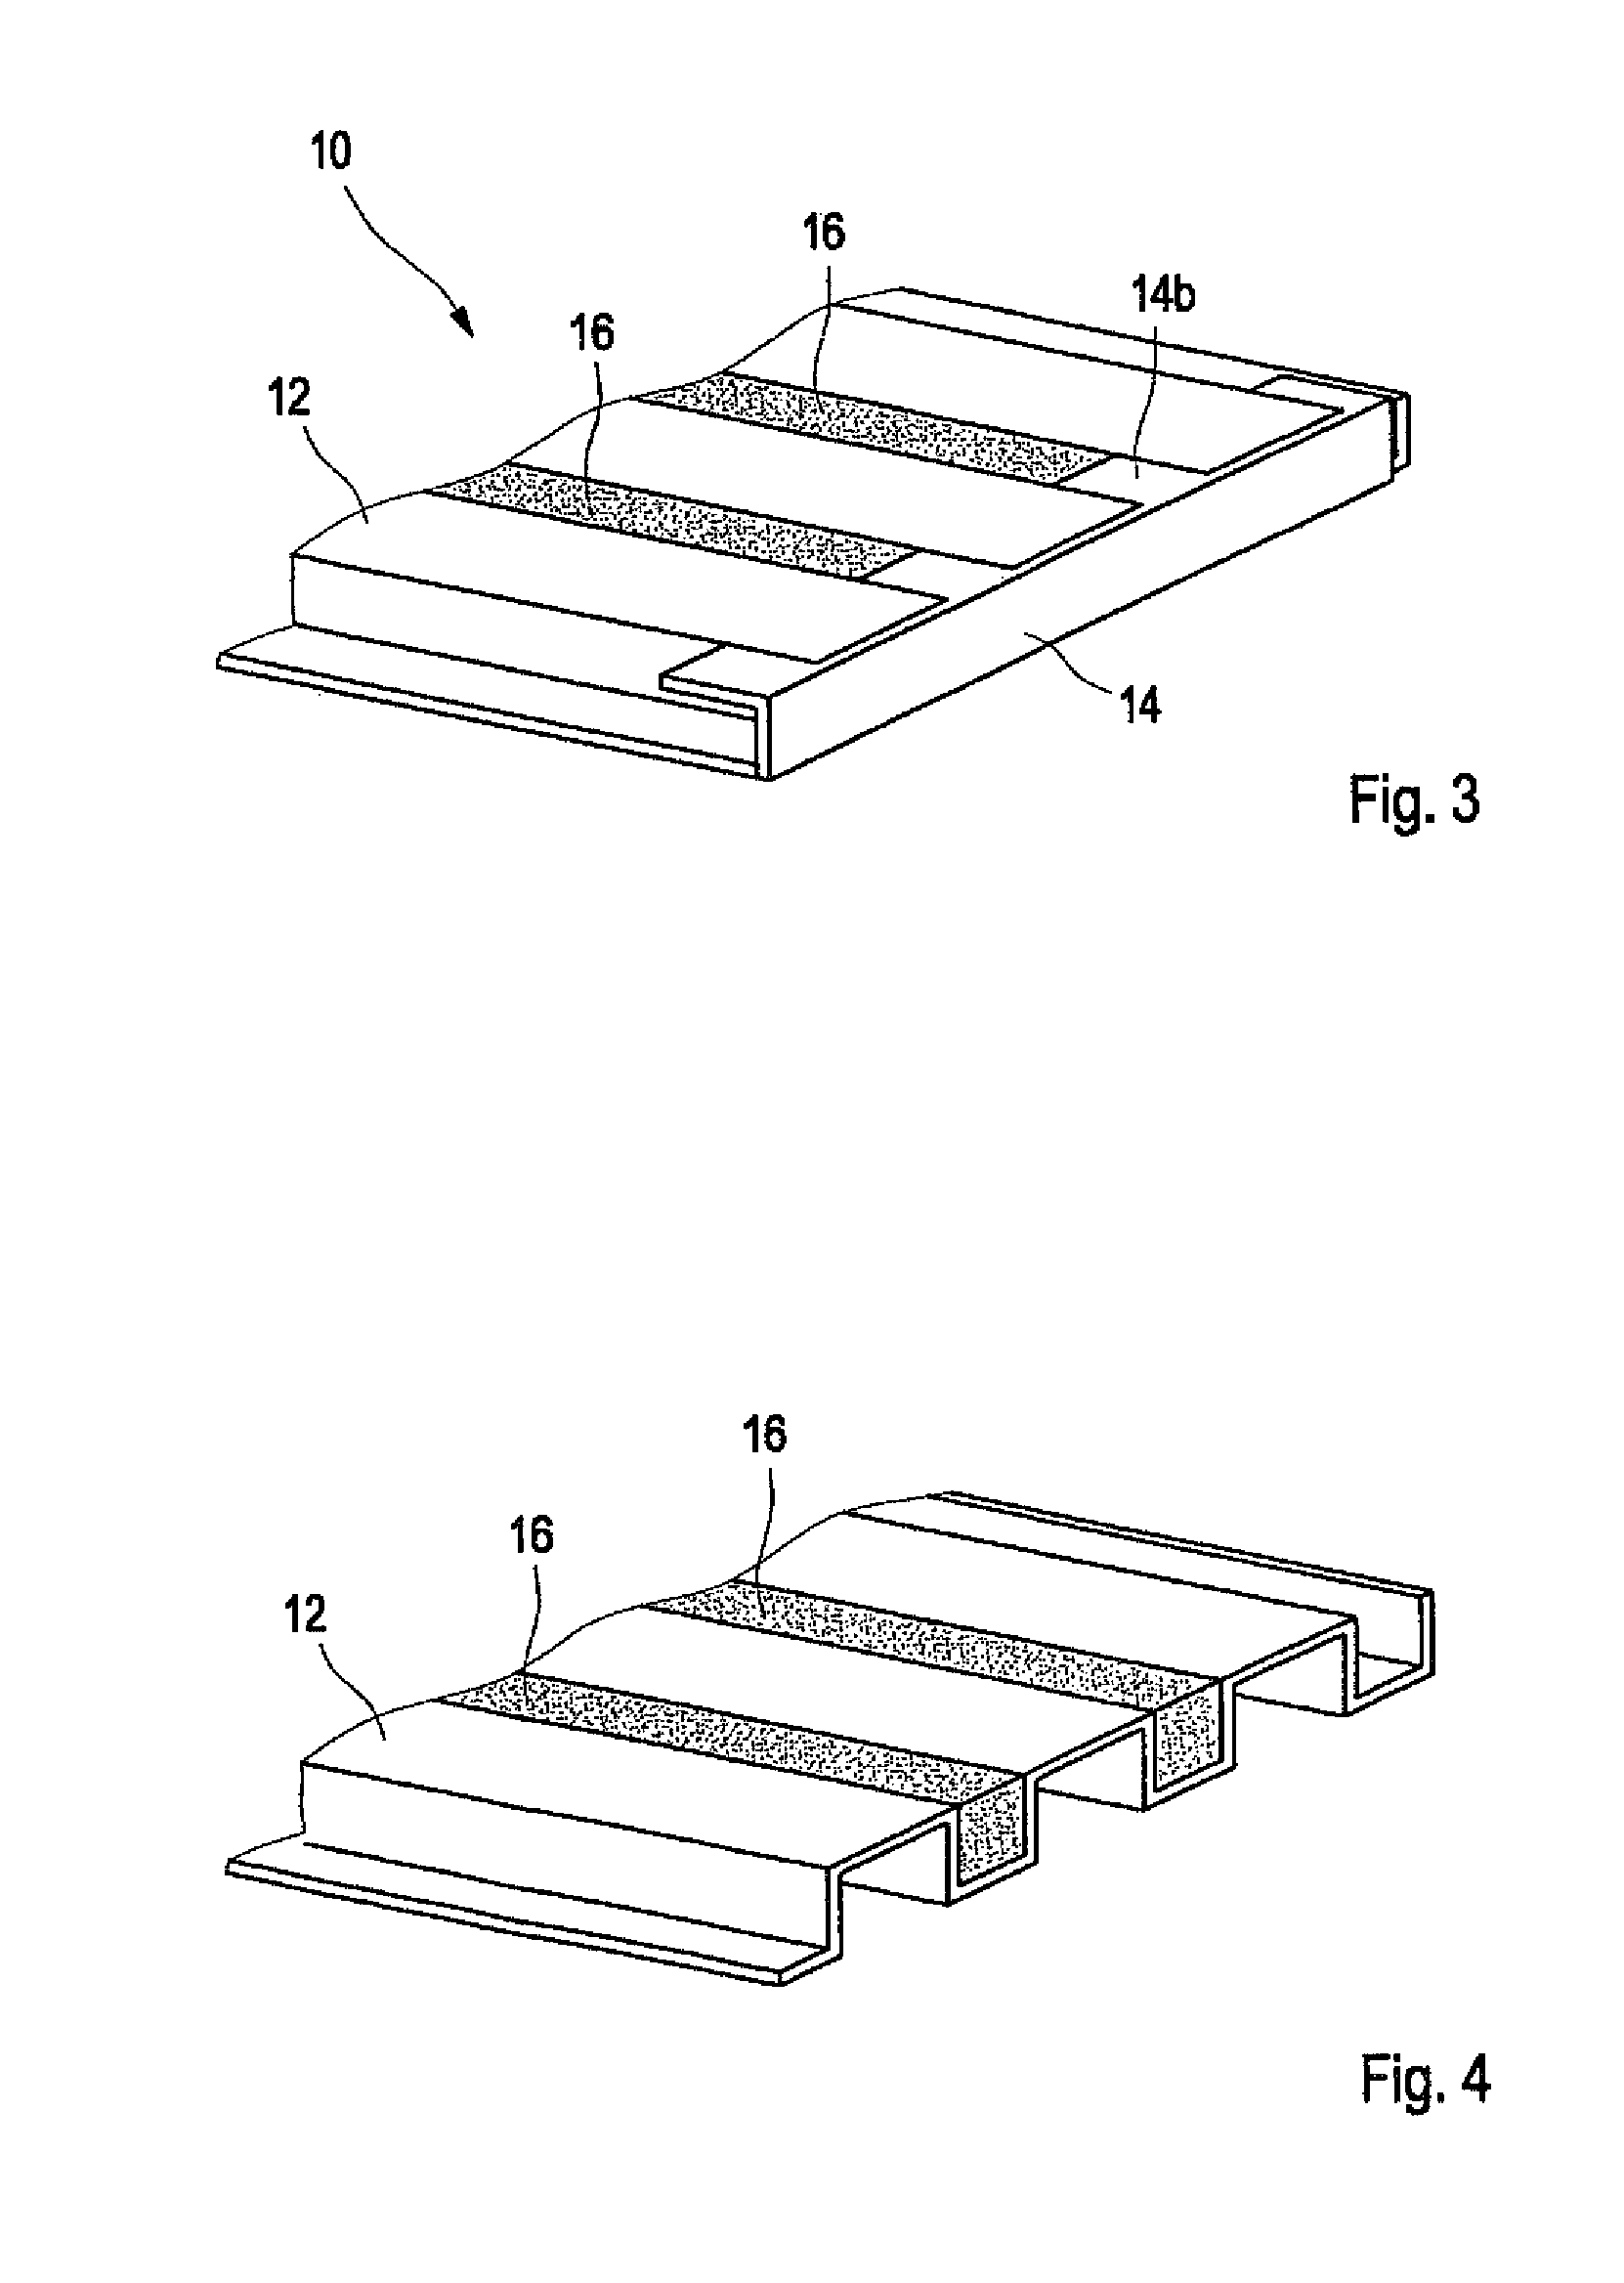 Connection arrangement of structural units and method for connecting structural units